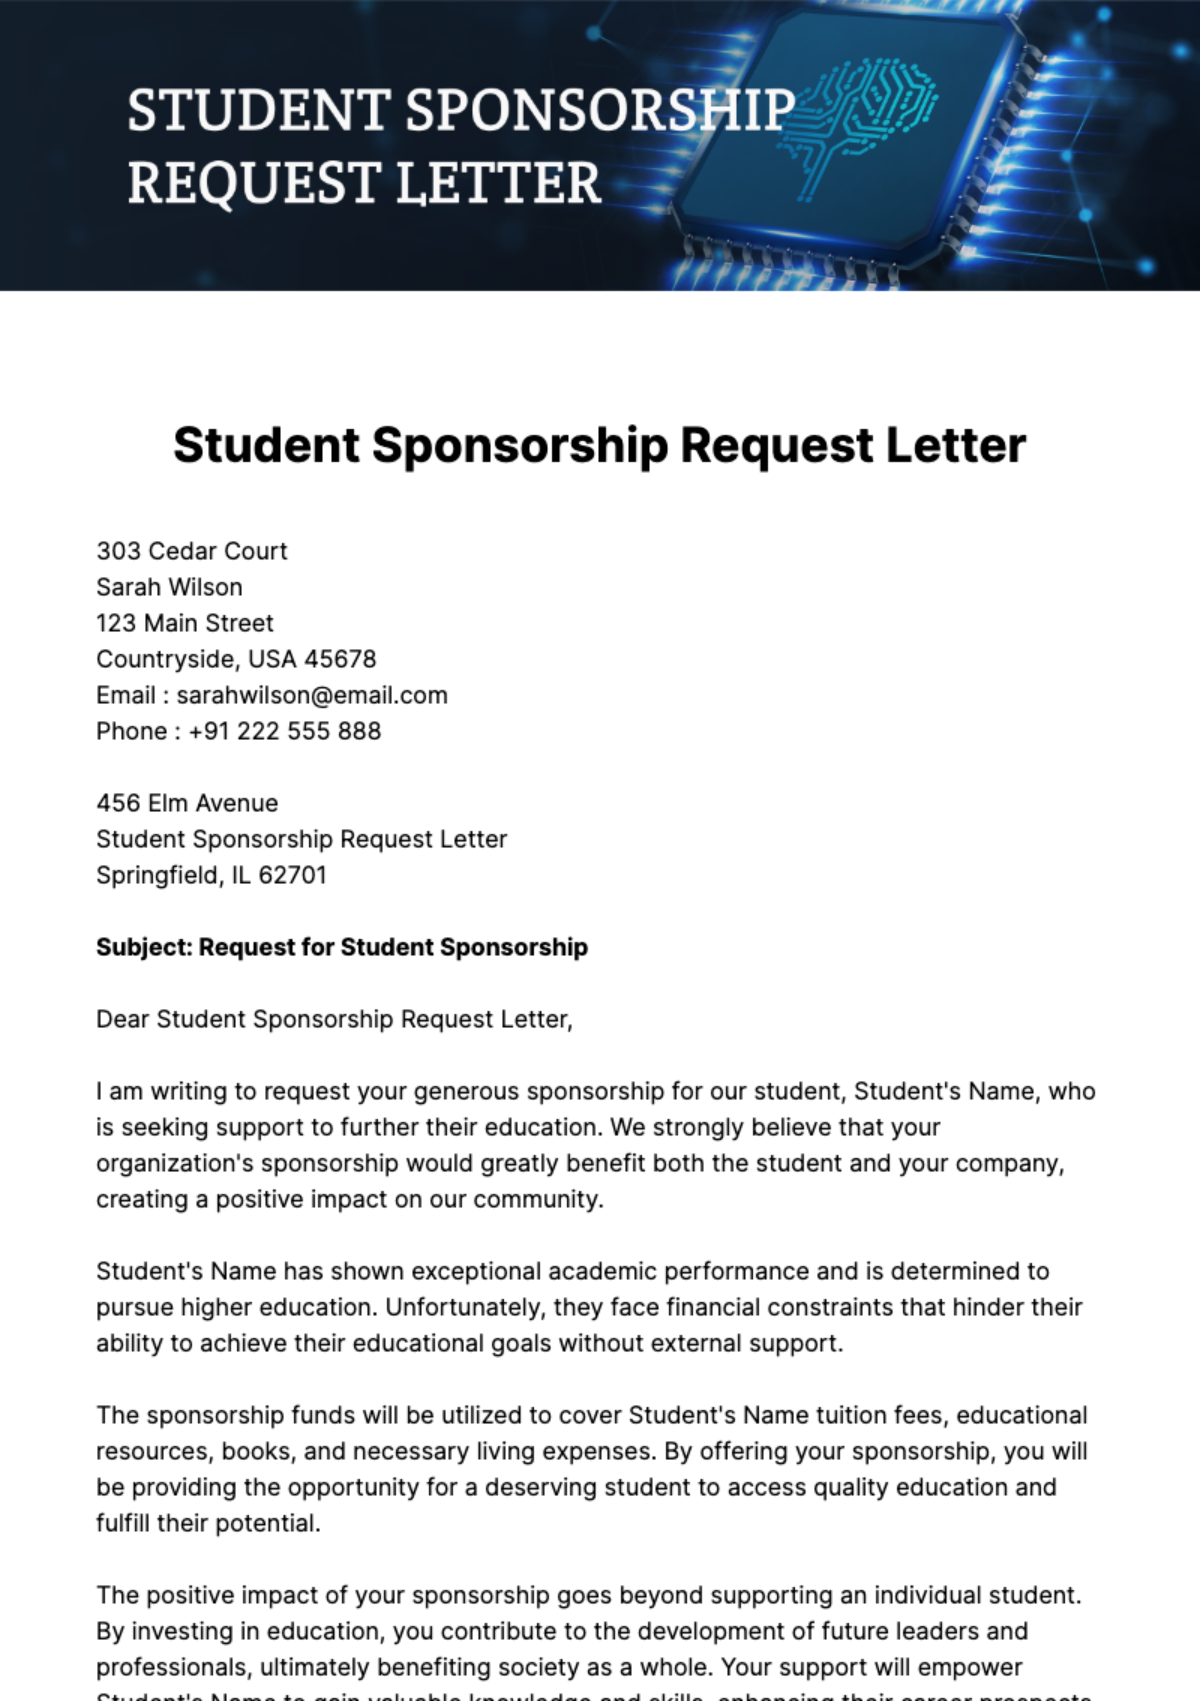 Student Sponsorship Request Letter Template